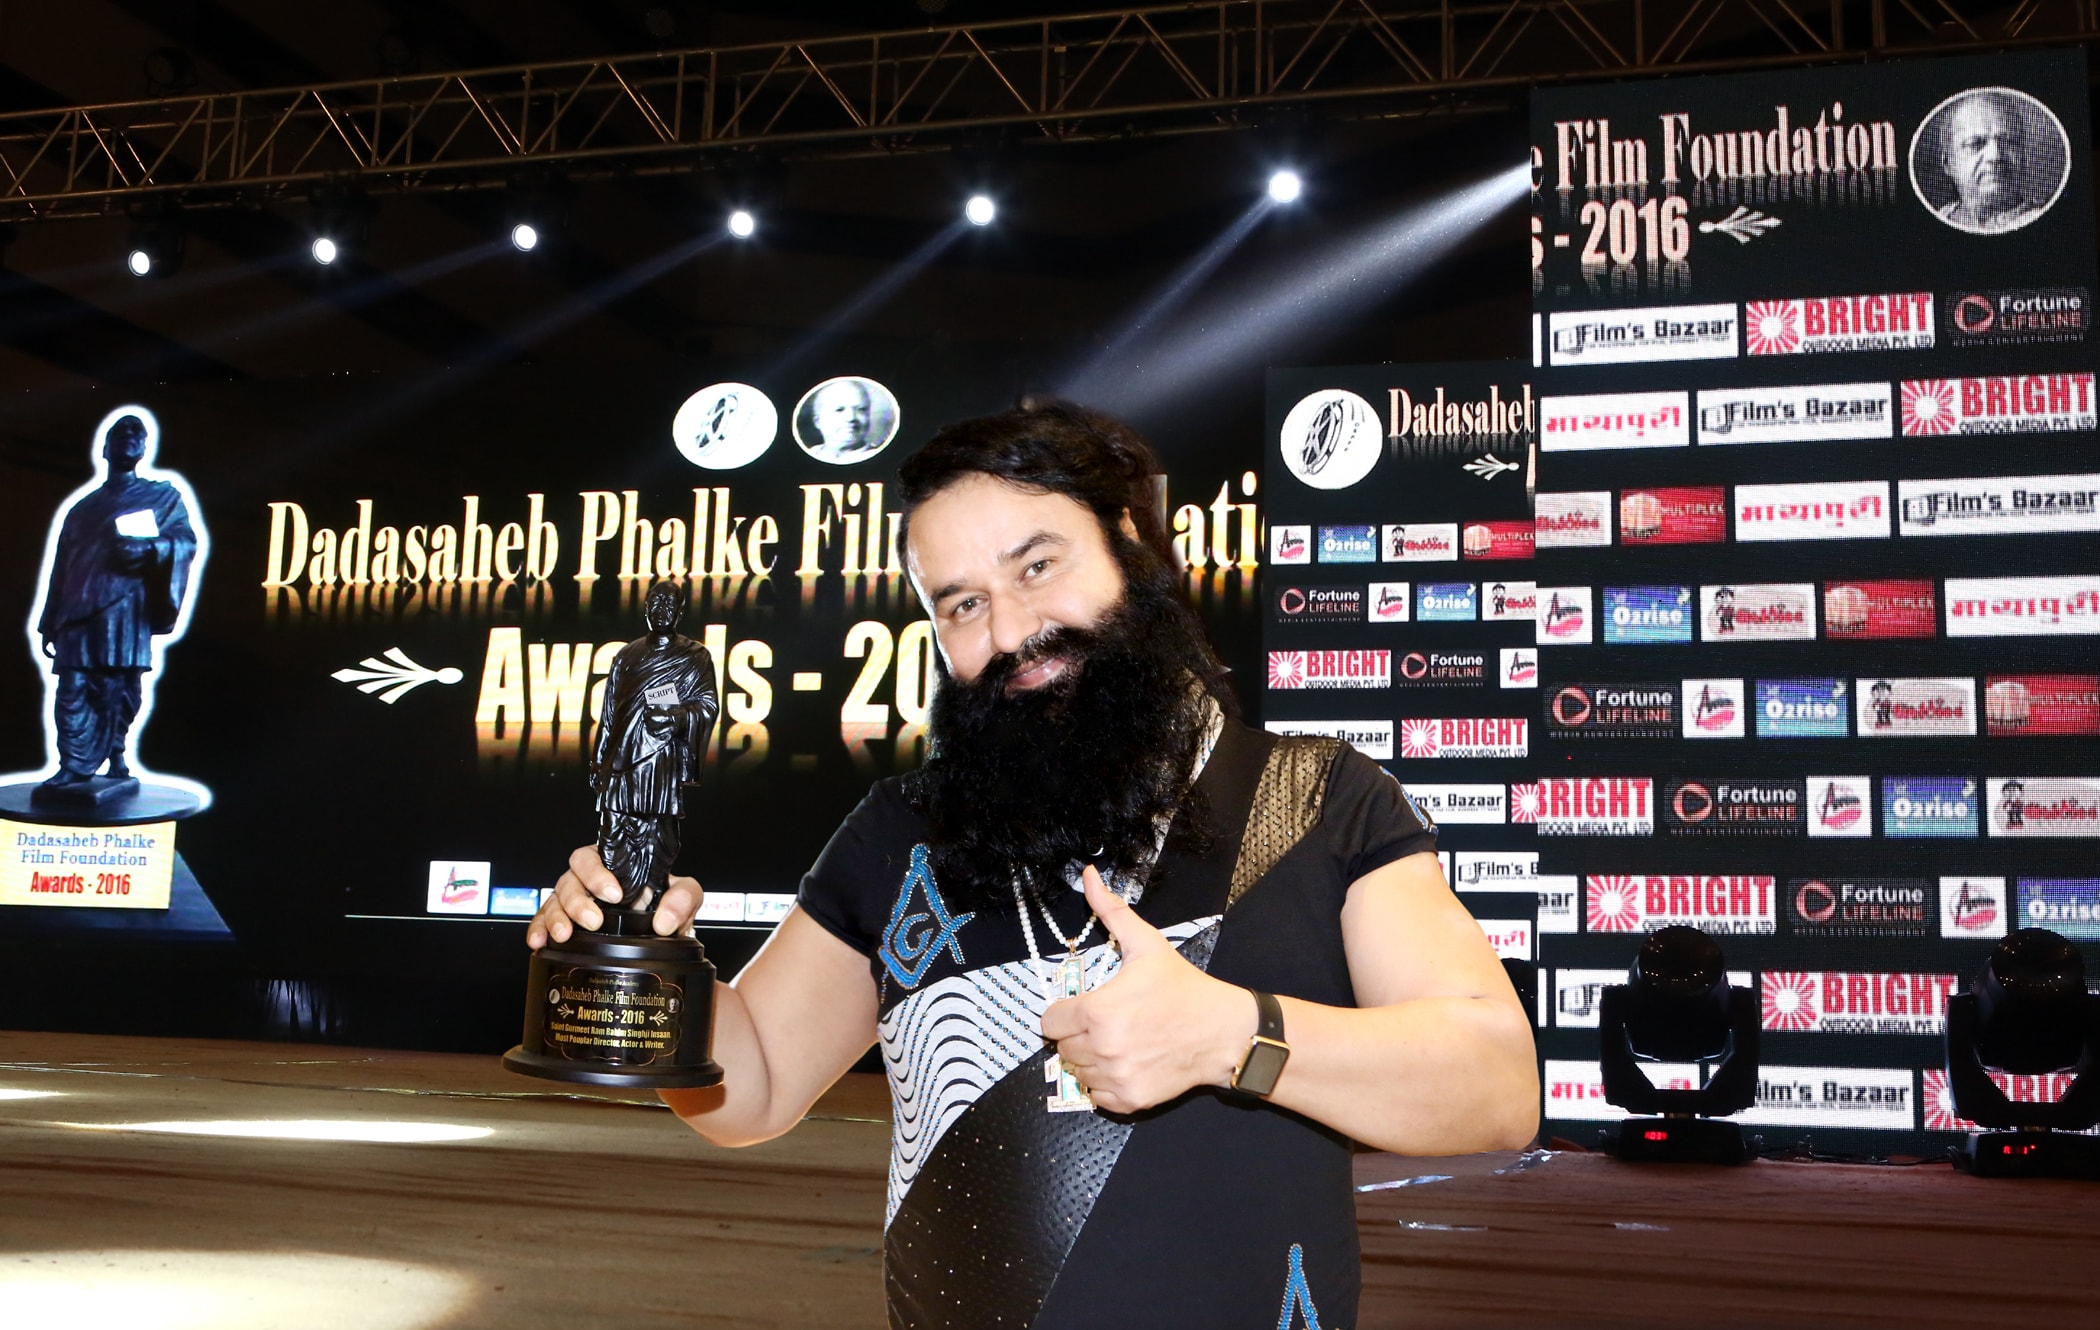 Award to MSG